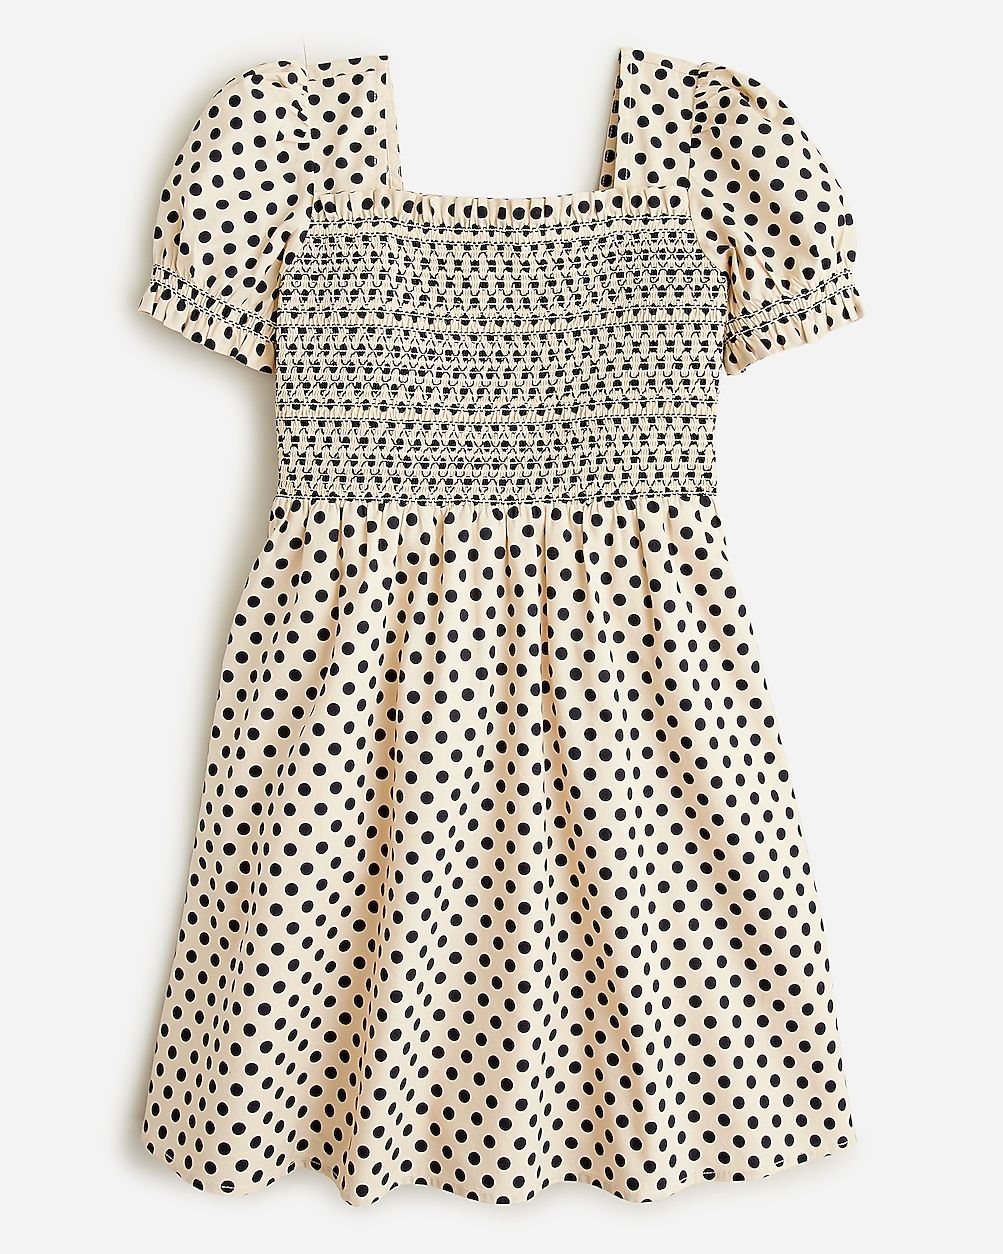 How to wear itGirls' smocked dress in cotton poplin dot$59.50$98.00 (39% Off)Limited time. Price ... | J.Crew US